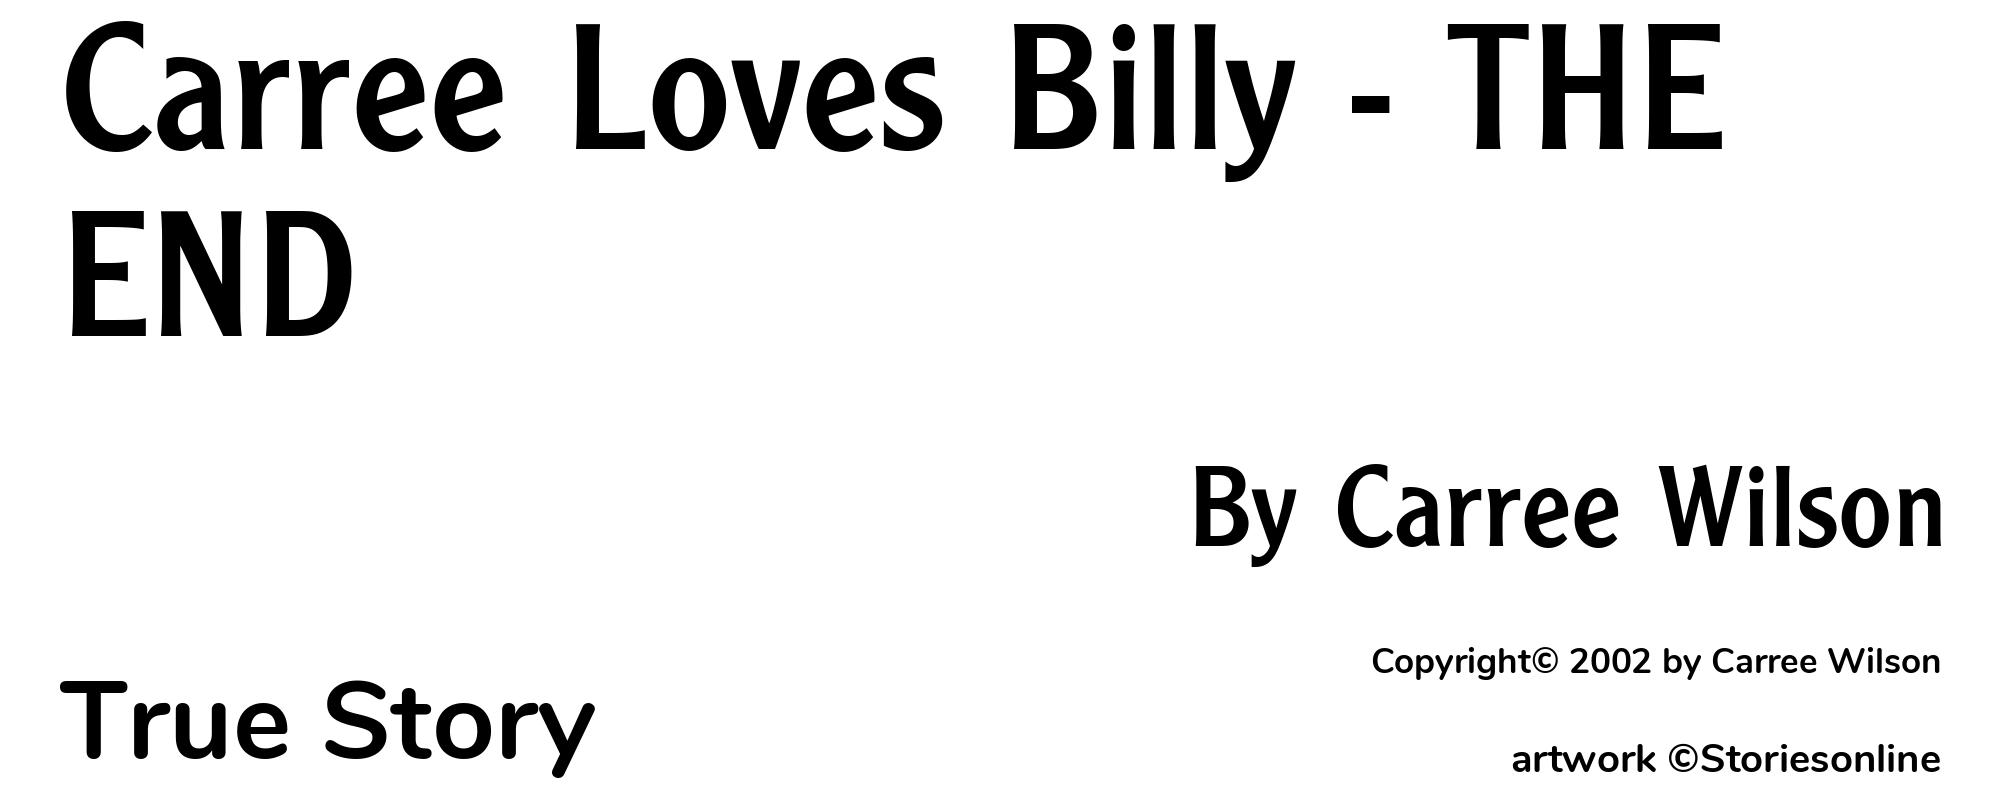 Carree Loves Billy - THE END - Cover